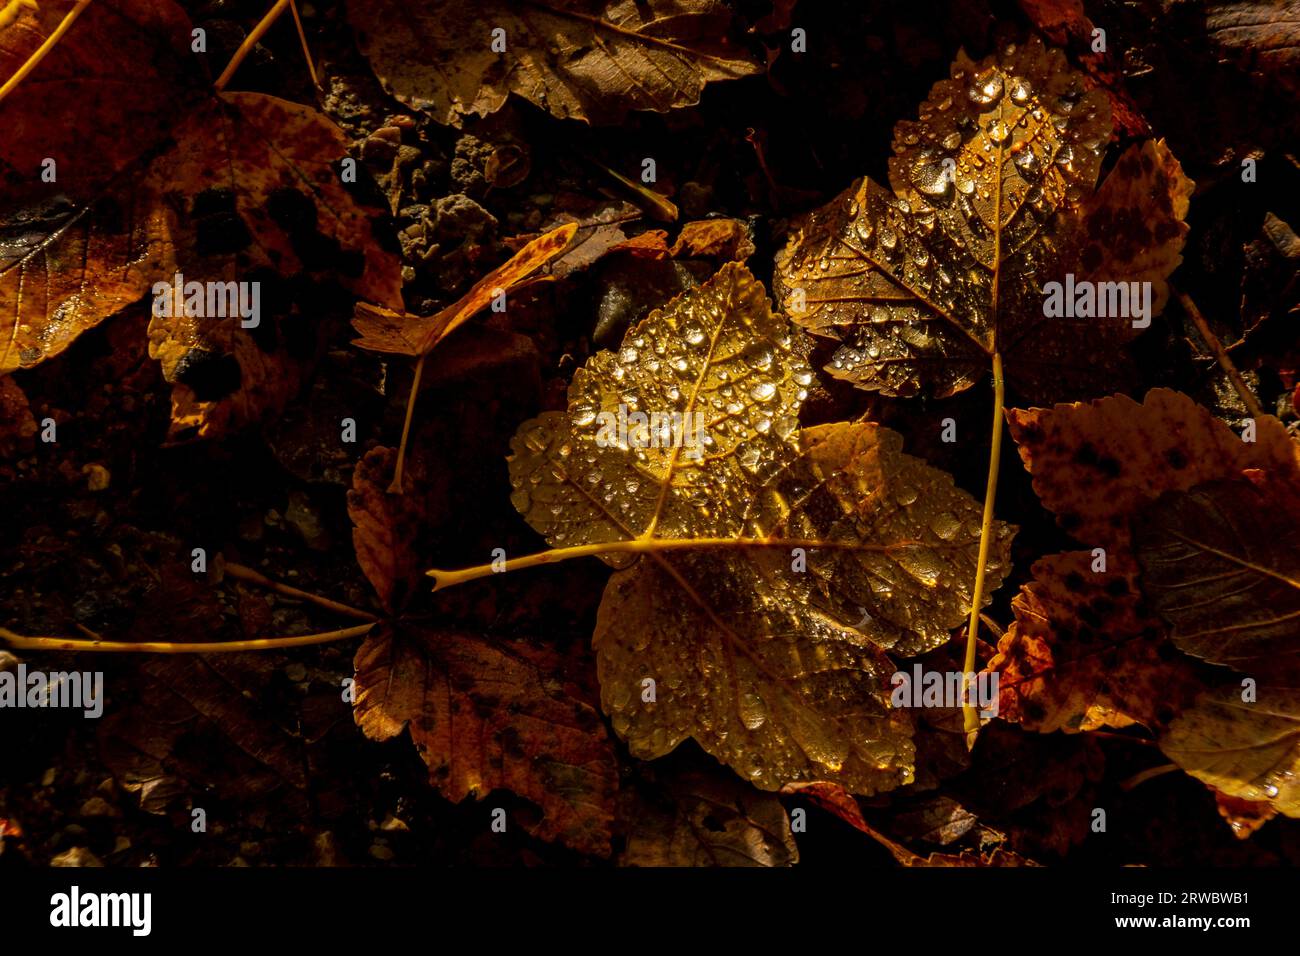 From above full frame background of dry golden leaves on ground covered with raindrops in sunlight Stock Photo